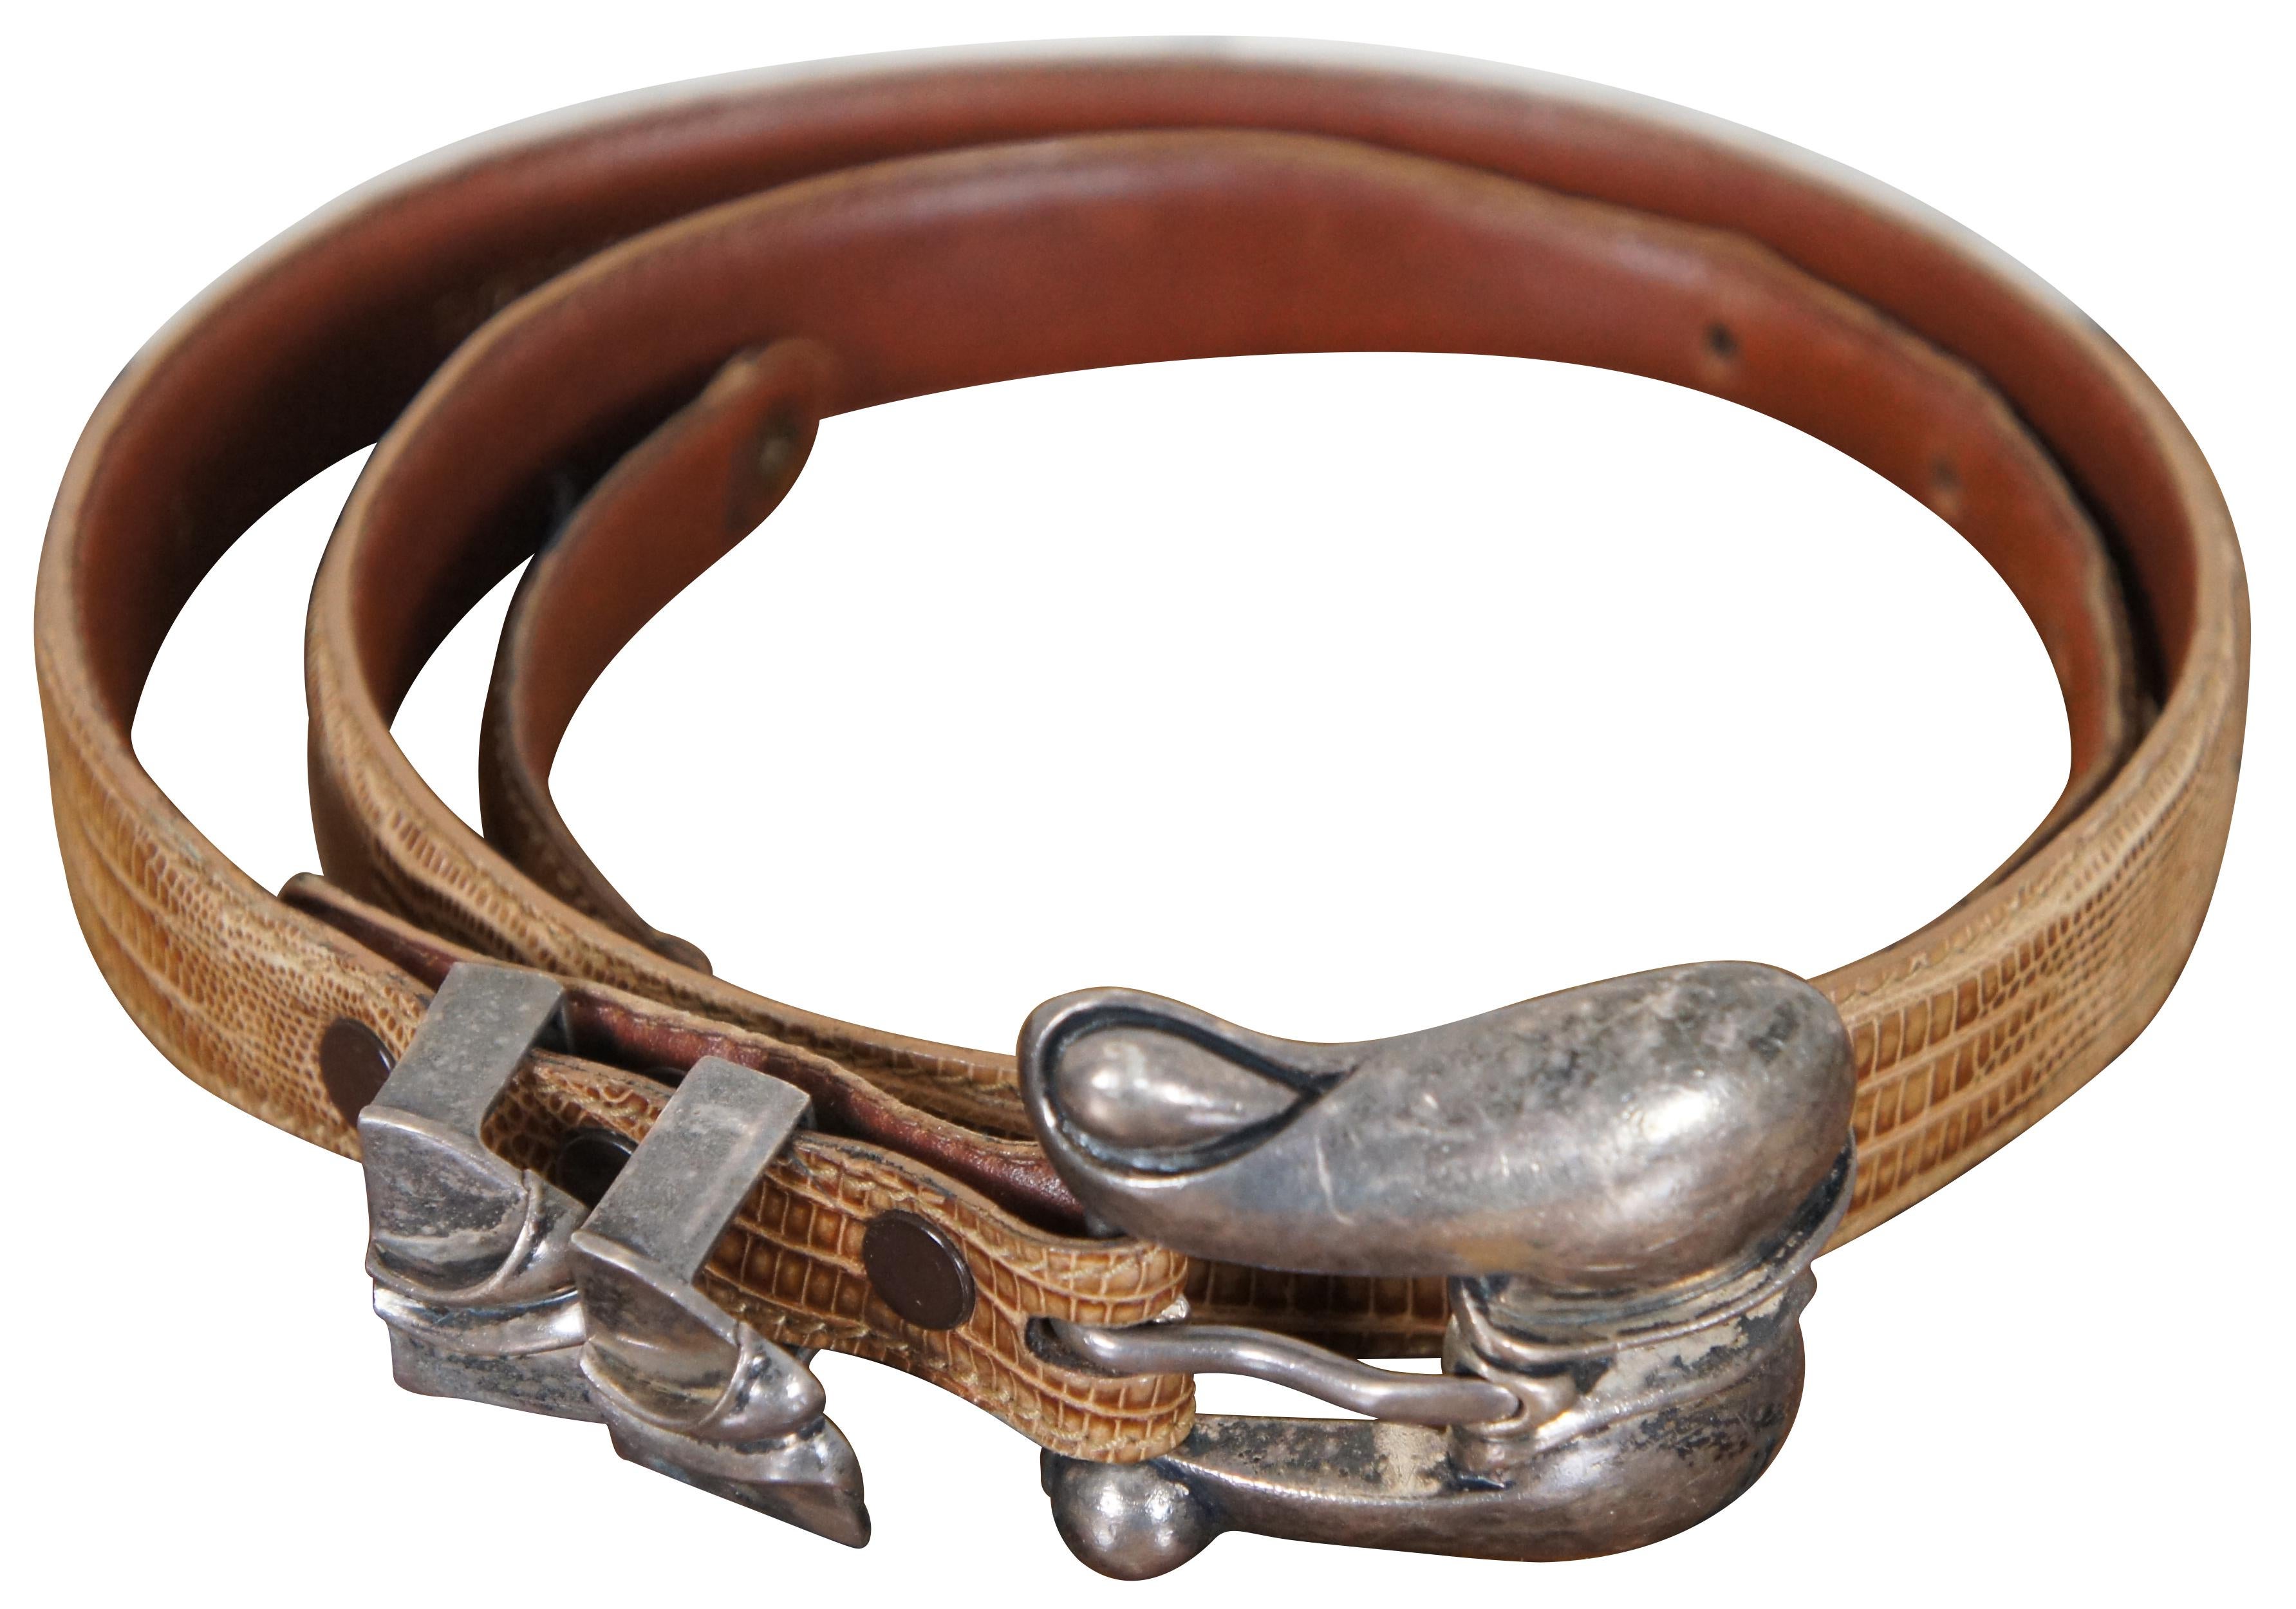 Vintage 1990 Barry Kieselstein-Cord light brown genuine lizard skin belt with Art Nouveau style sterling silver buckle number 290.

Measures: 39” x 1” / Fits - 27.5” to 31.5” / Buckle - 2” x 0.25” x 1.75” / 85 g (length x width).

